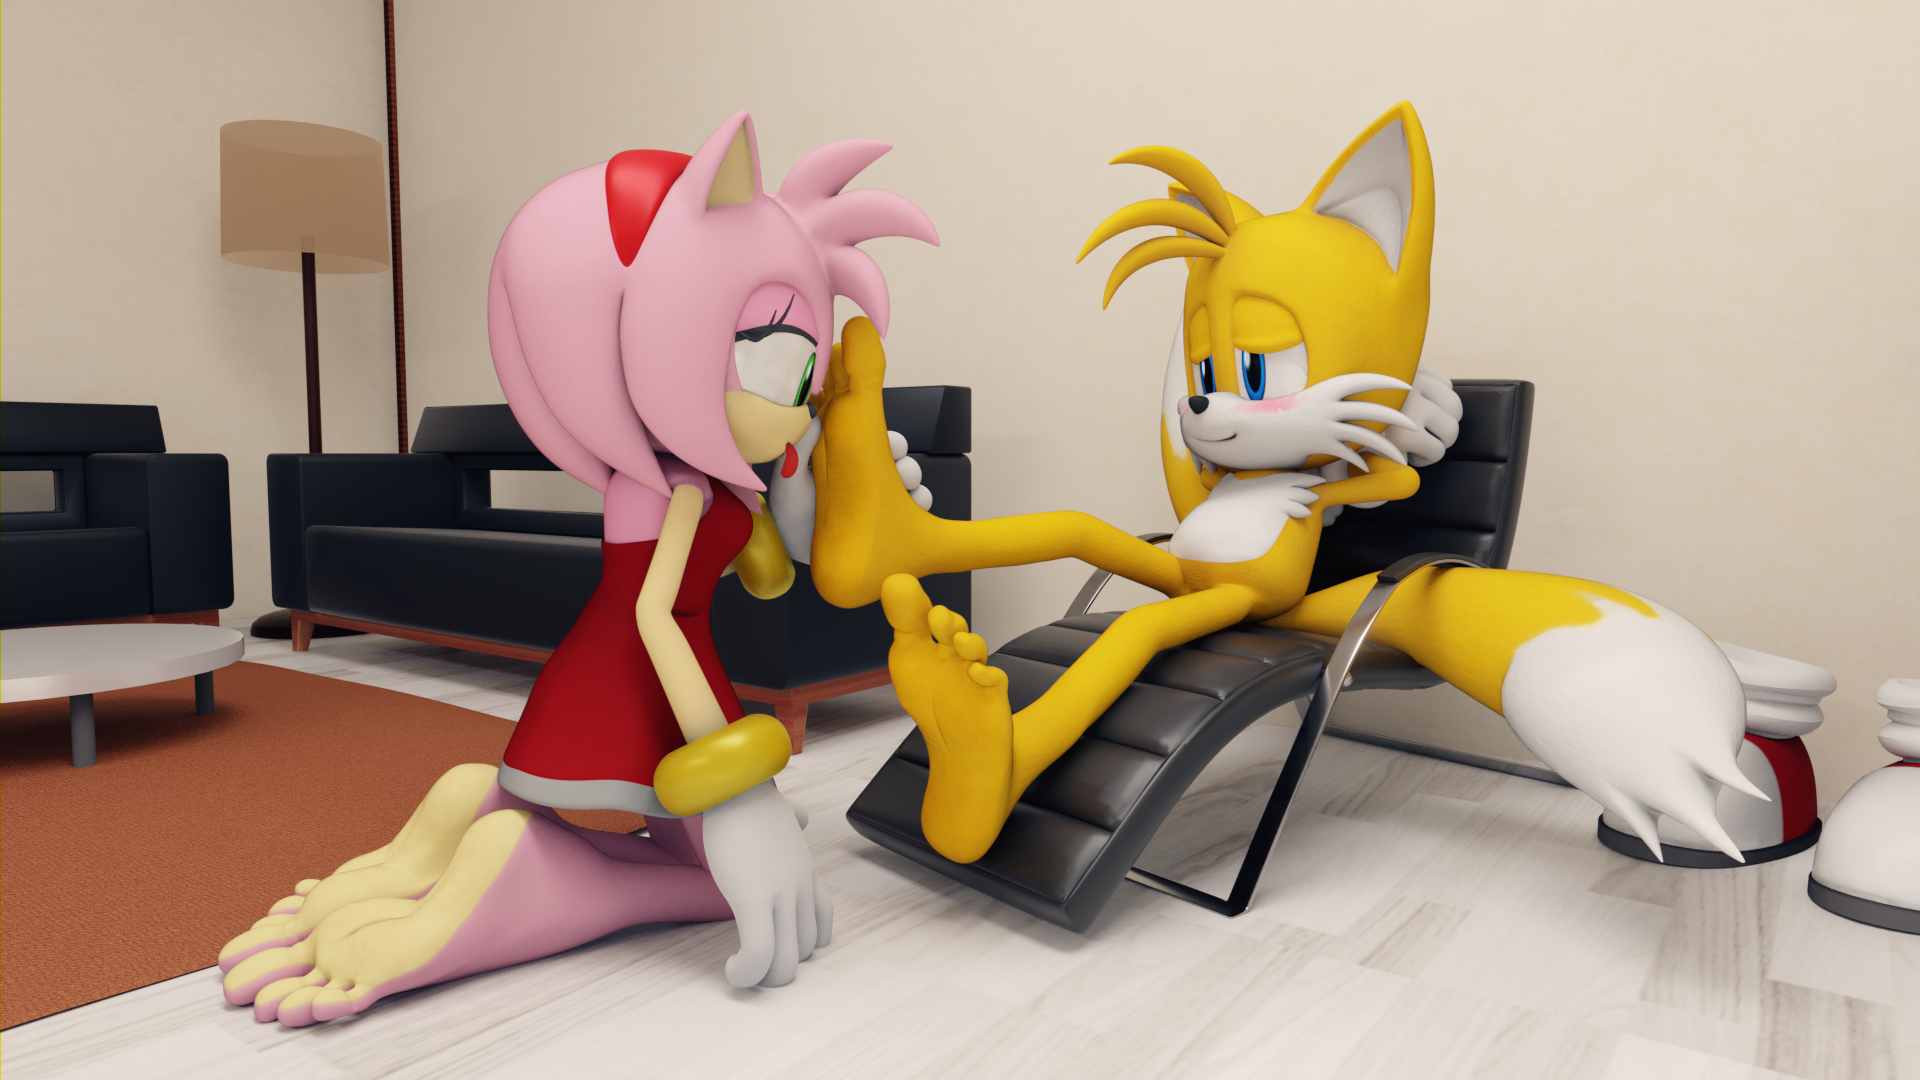 3d tail_s_feet_worshipped_by_feetymcfoot-dbonowt.png.